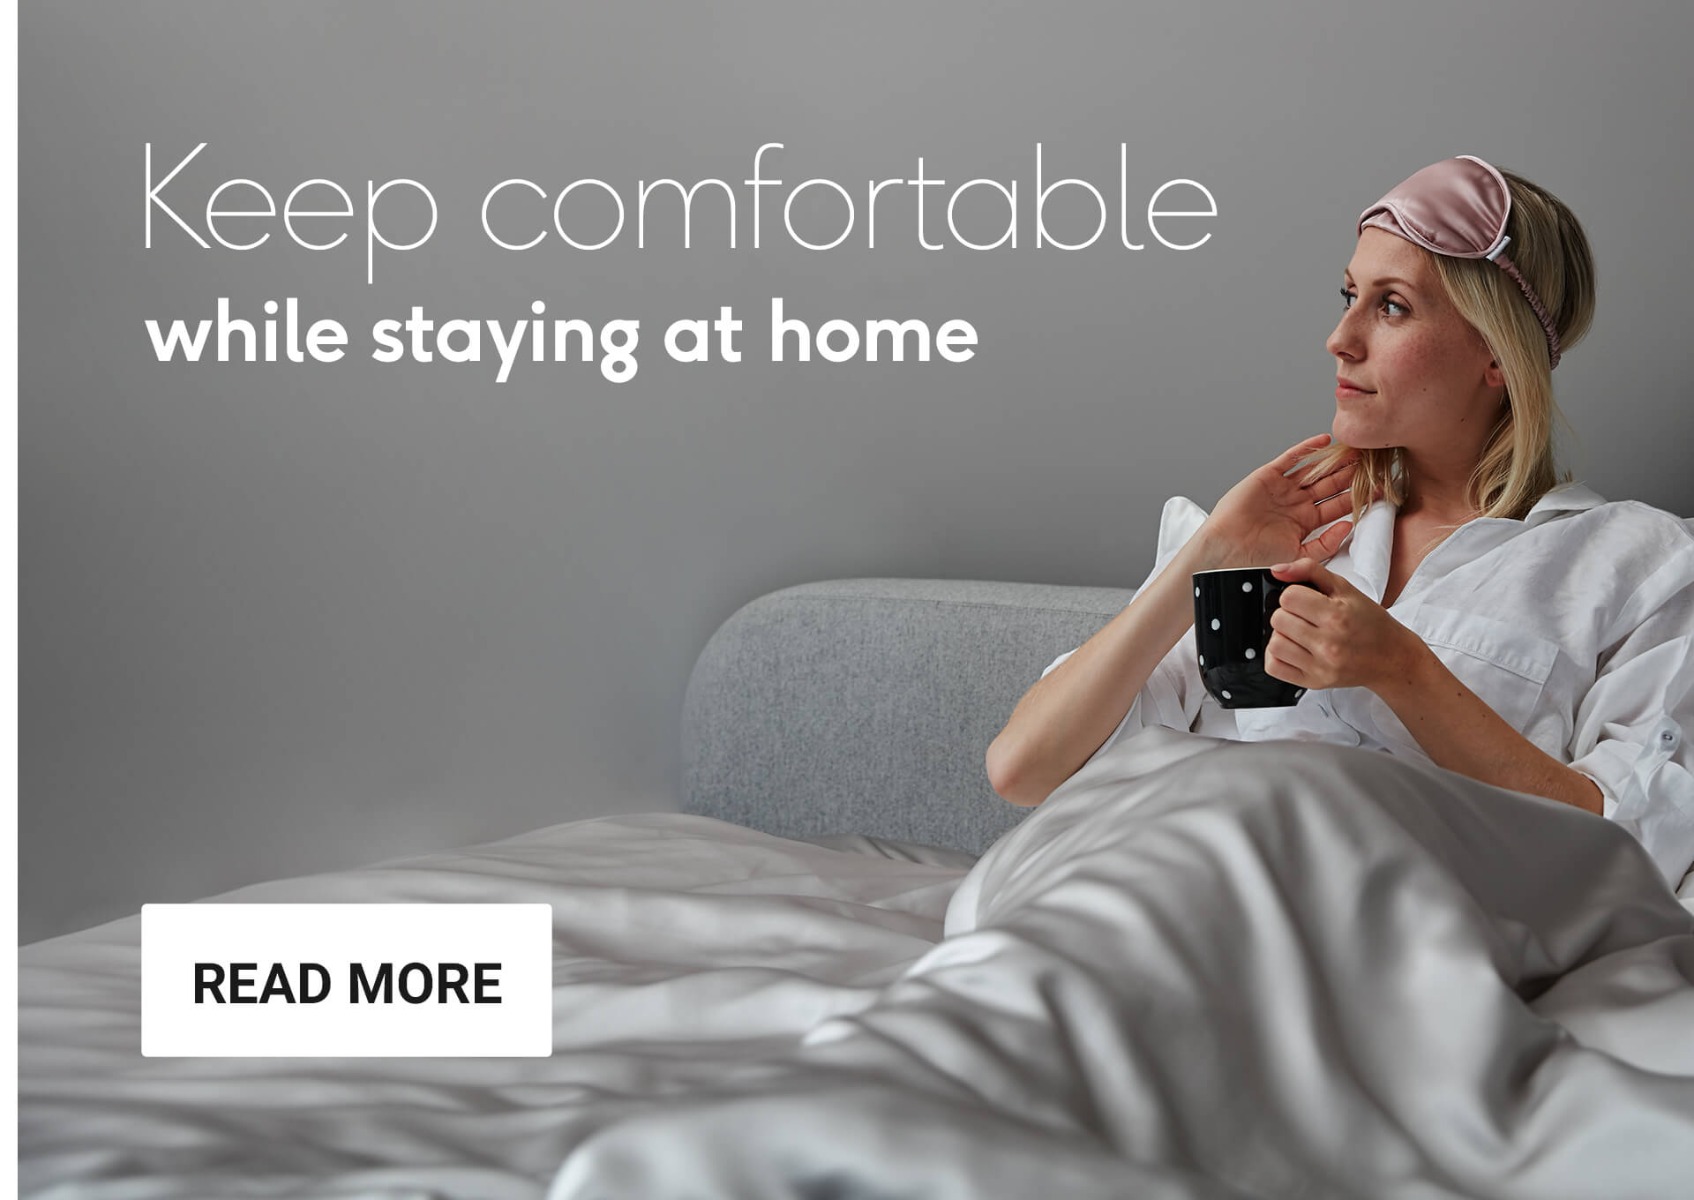 Get comfortable at home